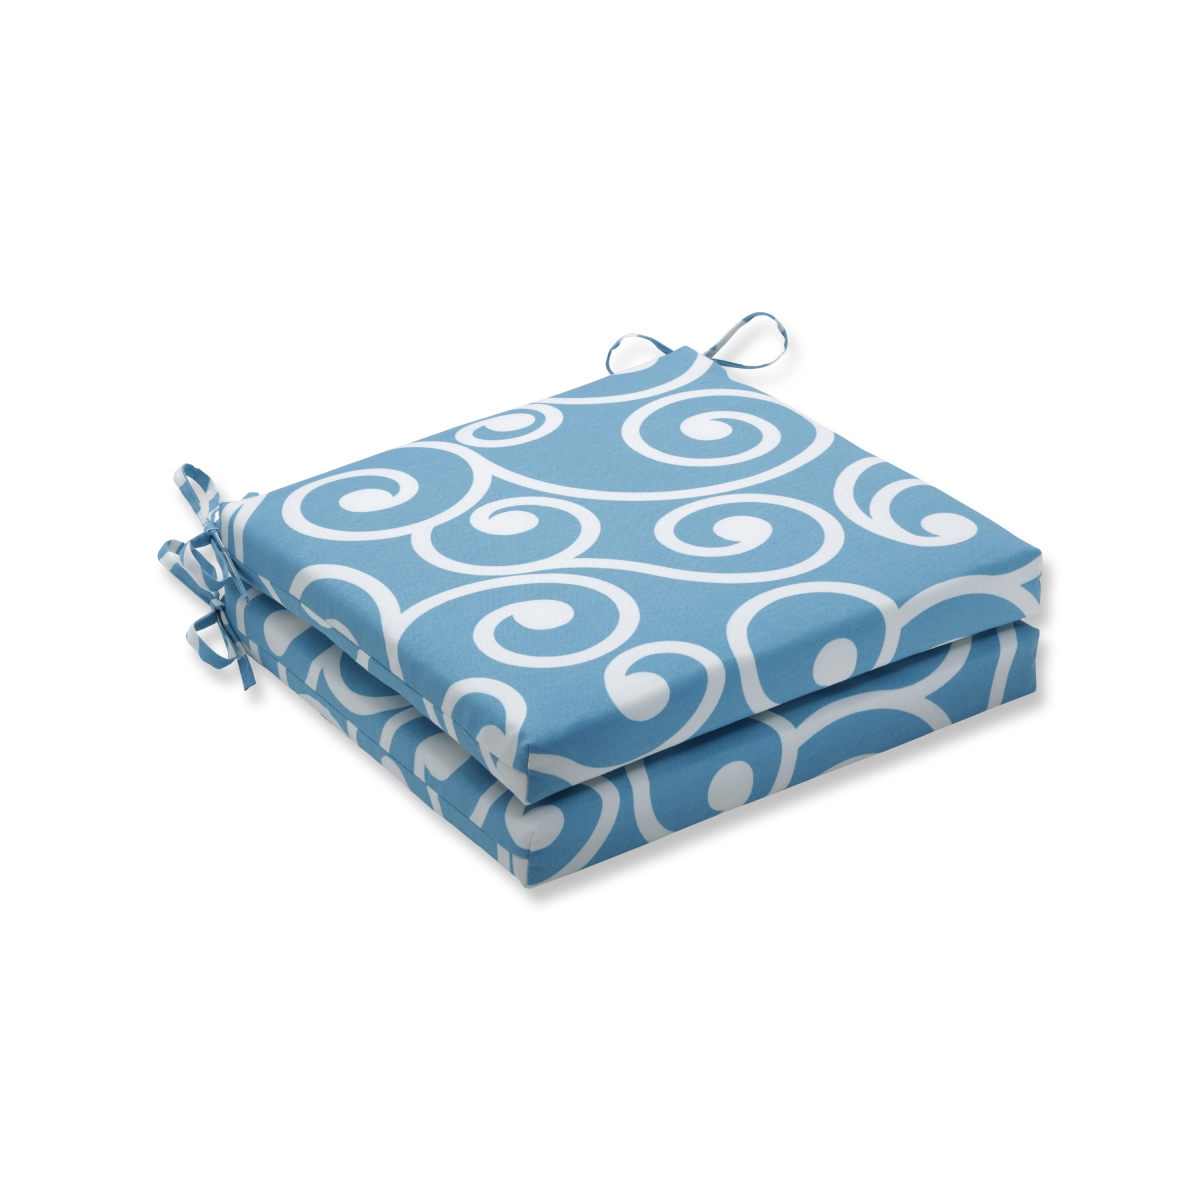 20 X 20 X 3 In. Outdoor & Indoor Best Turquoise Squared Corners Seat Cushion, Blue - Set Of 2